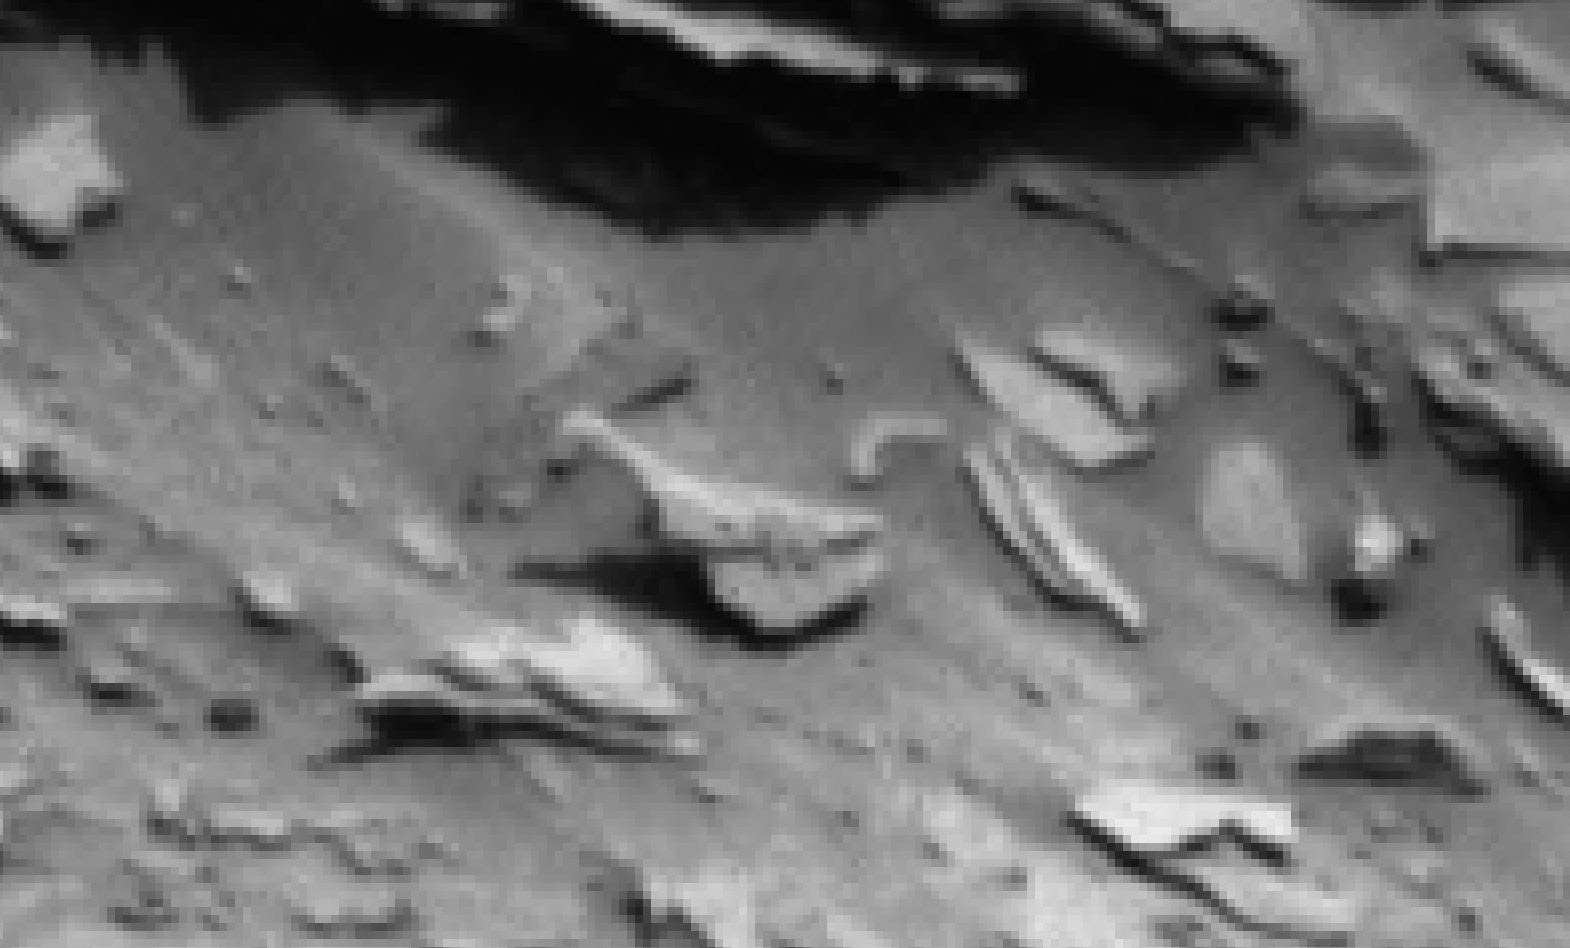 mars sol 1342 anomaly-artifacts 3 was life on mars